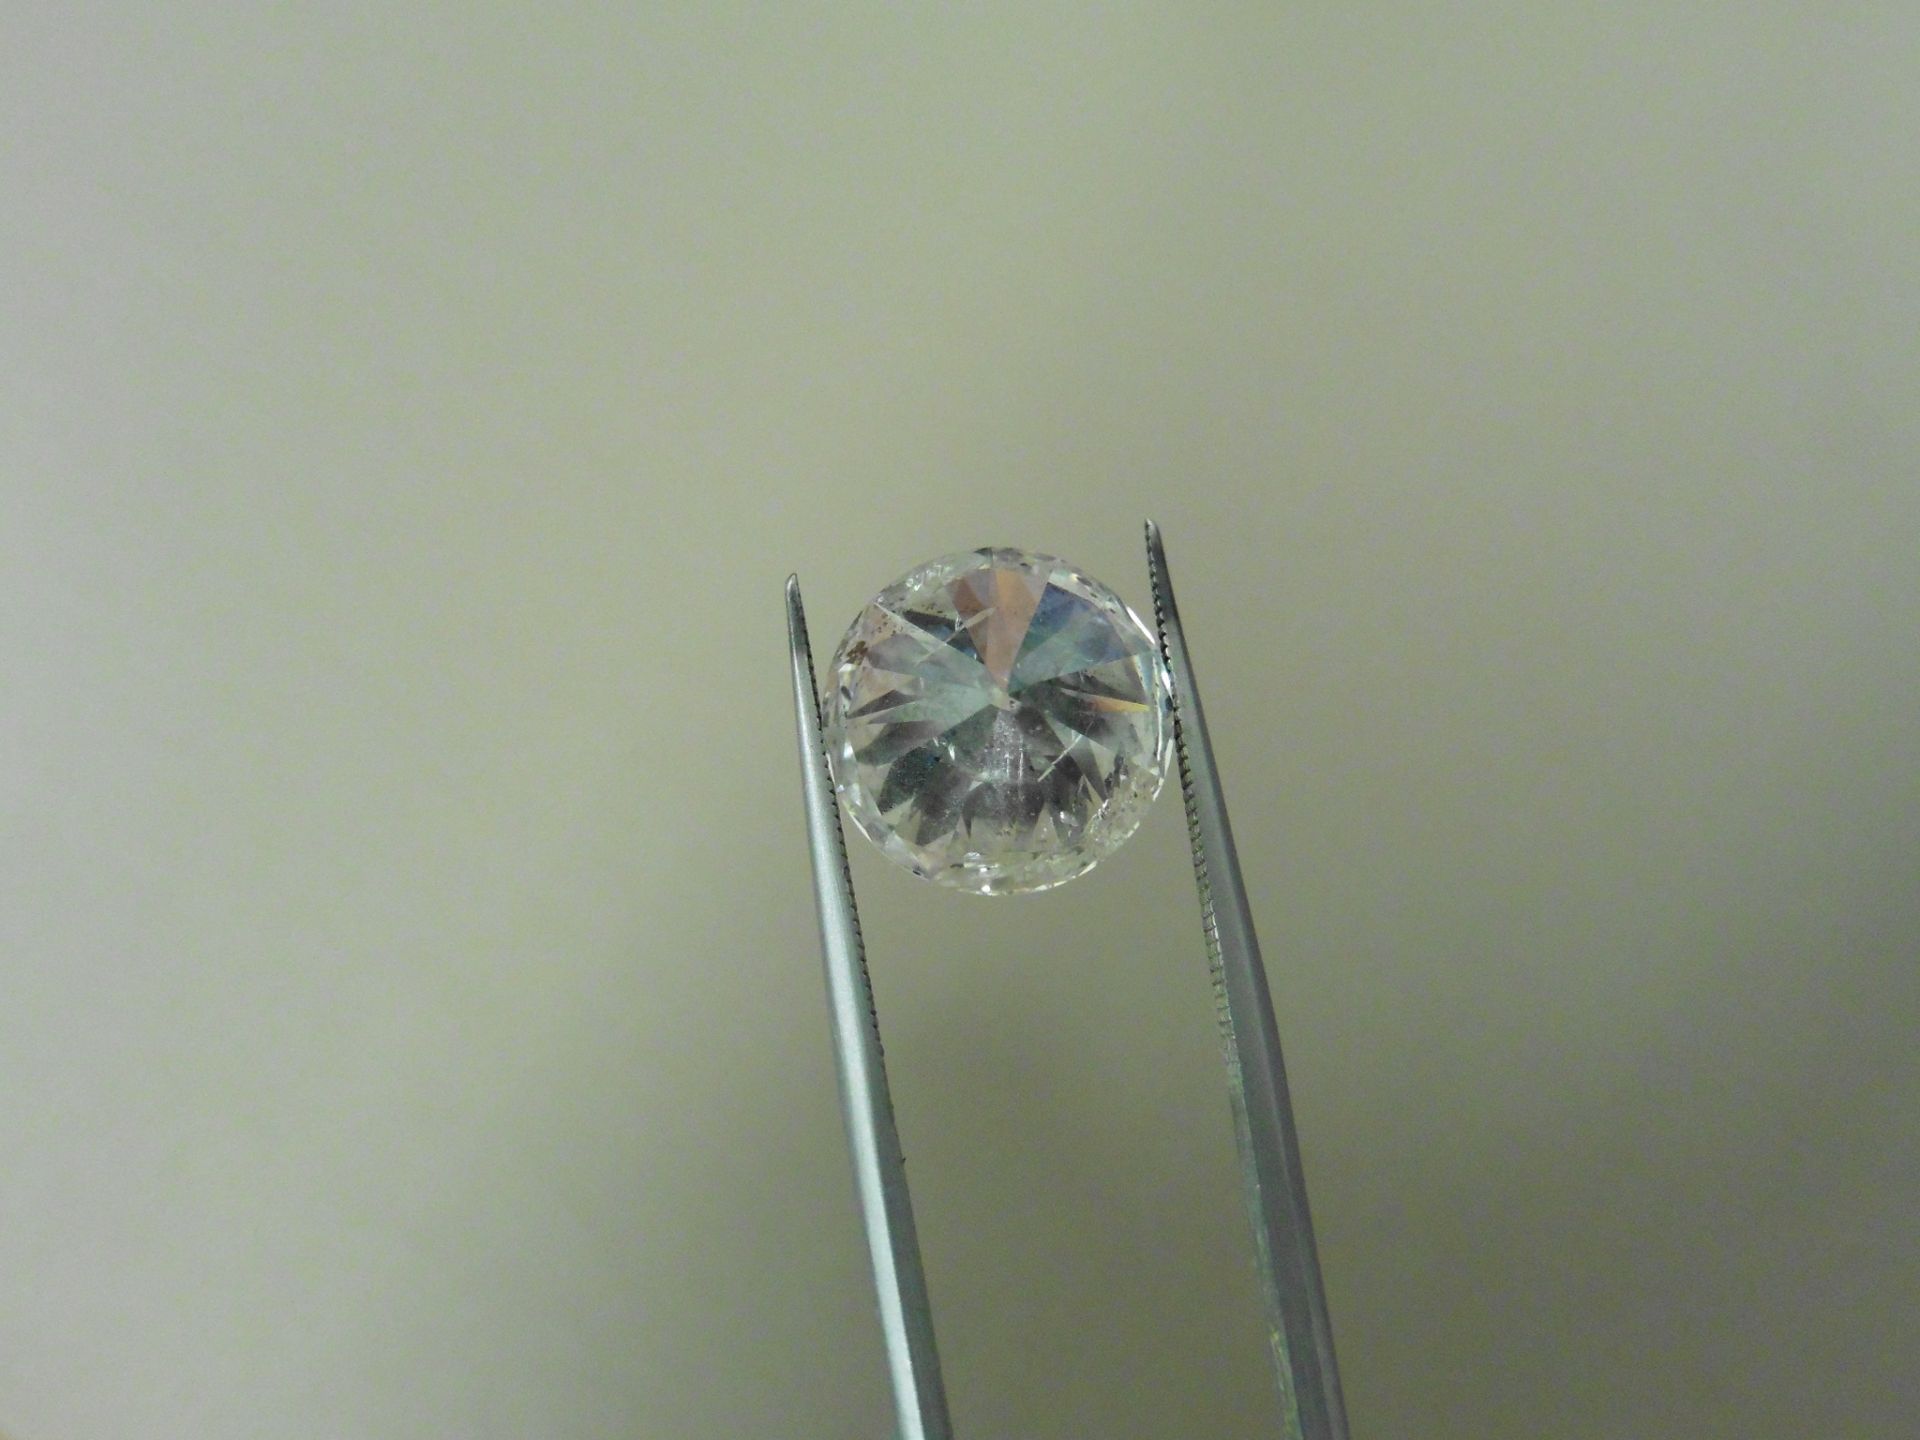 5.04ct natural loose briliant cut diamond. F colour and Il clarity. EGL certification. Valued at £ - Image 2 of 5